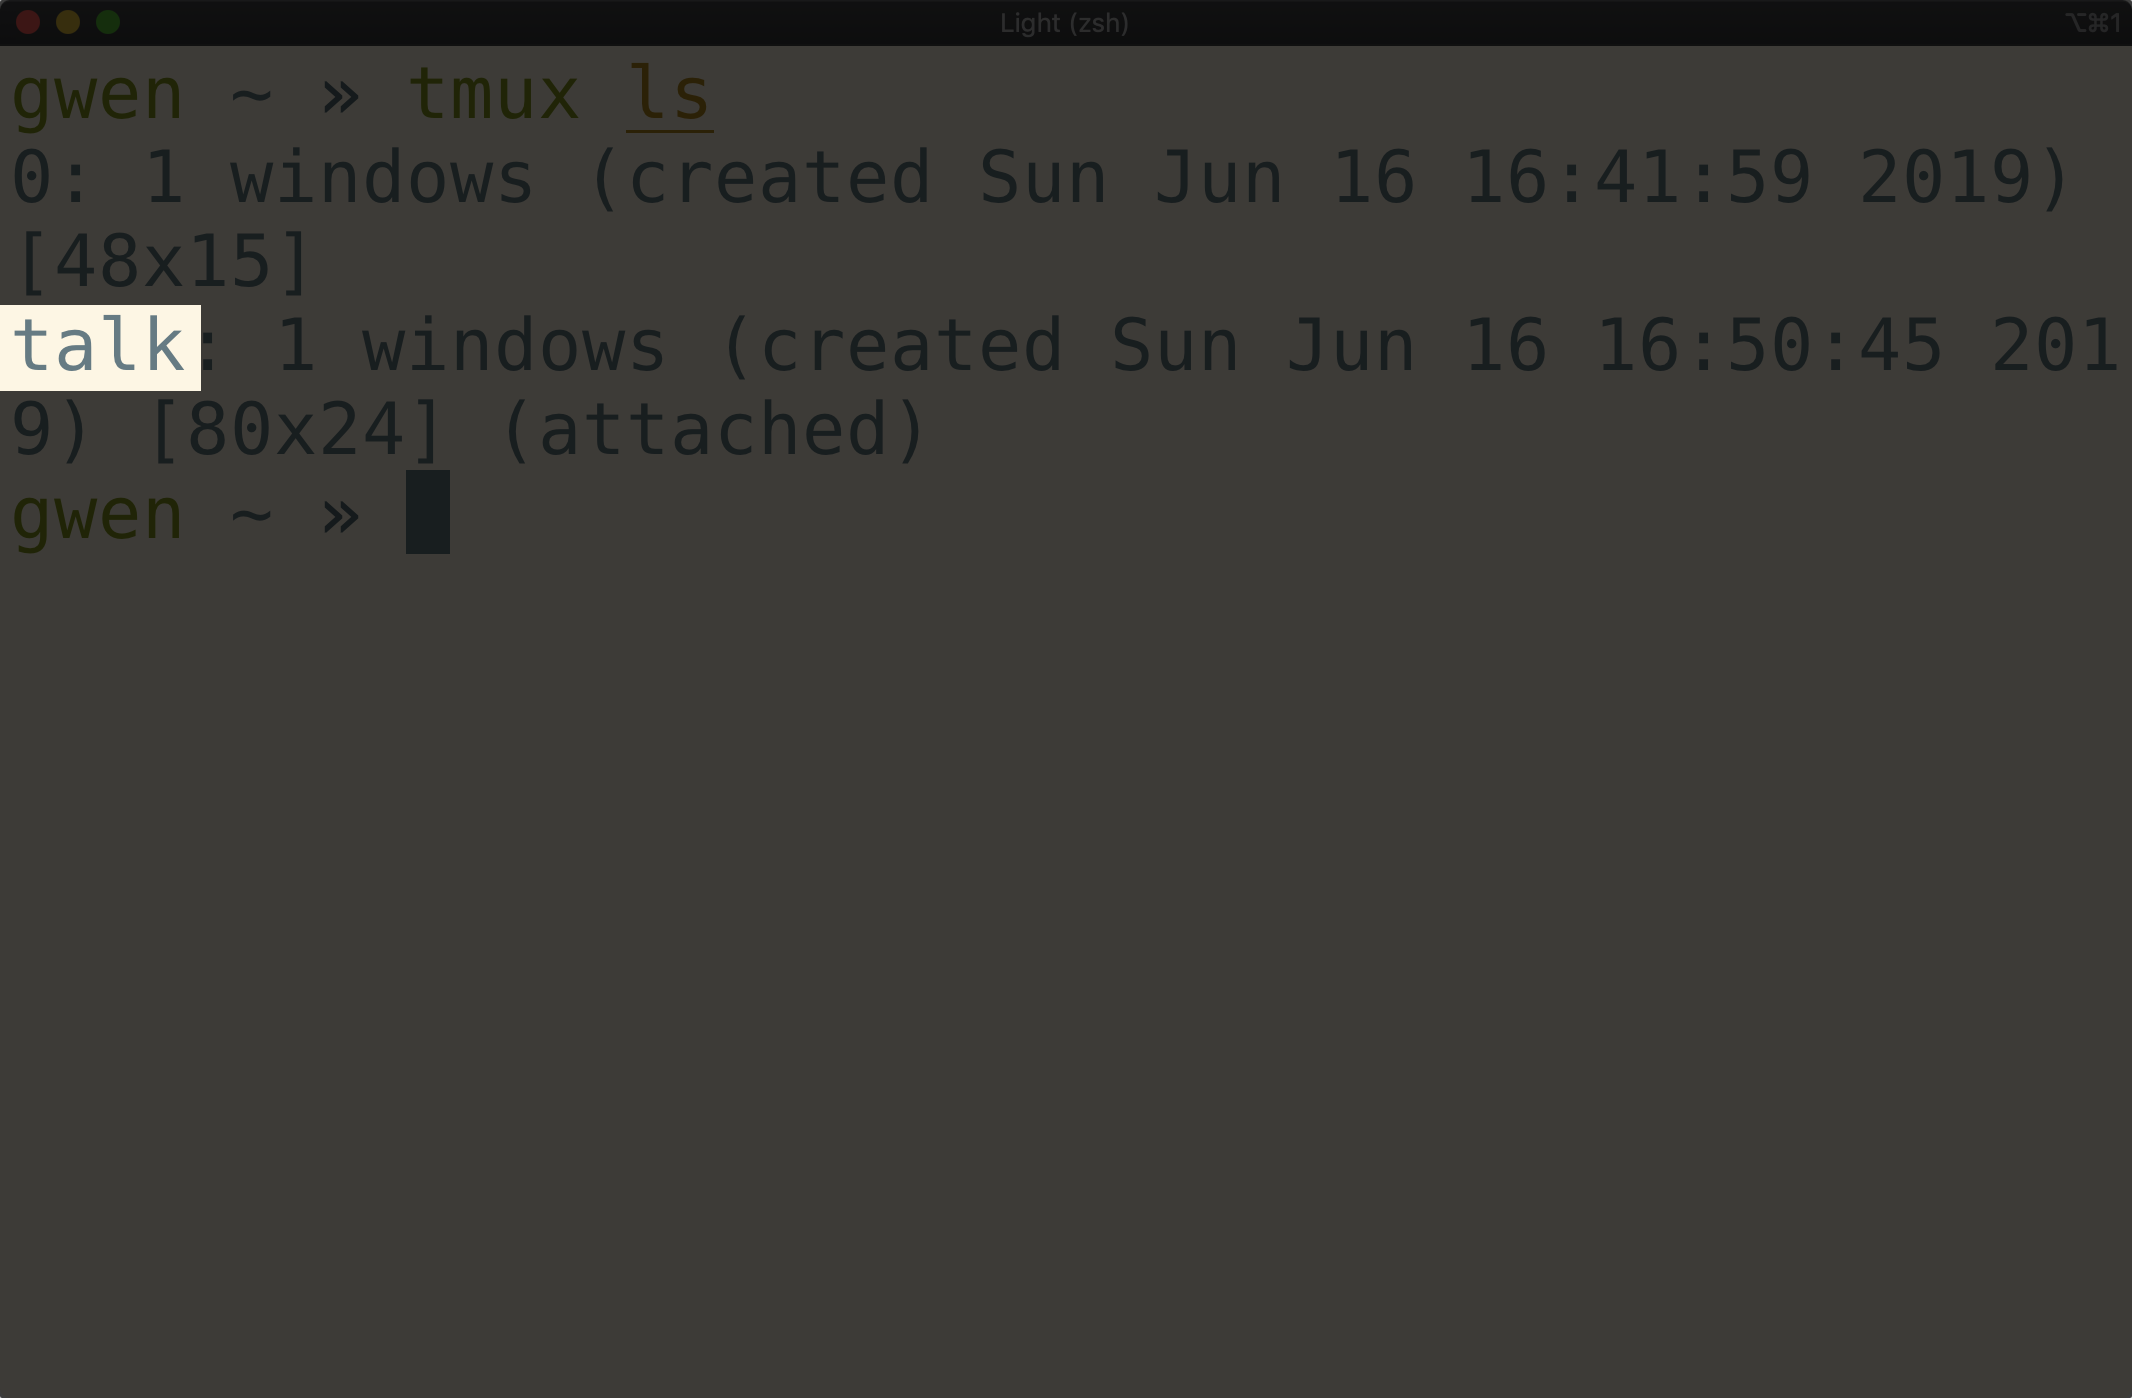 Terminal window showing <code>tmux ls</code> output with new session name
highlighted